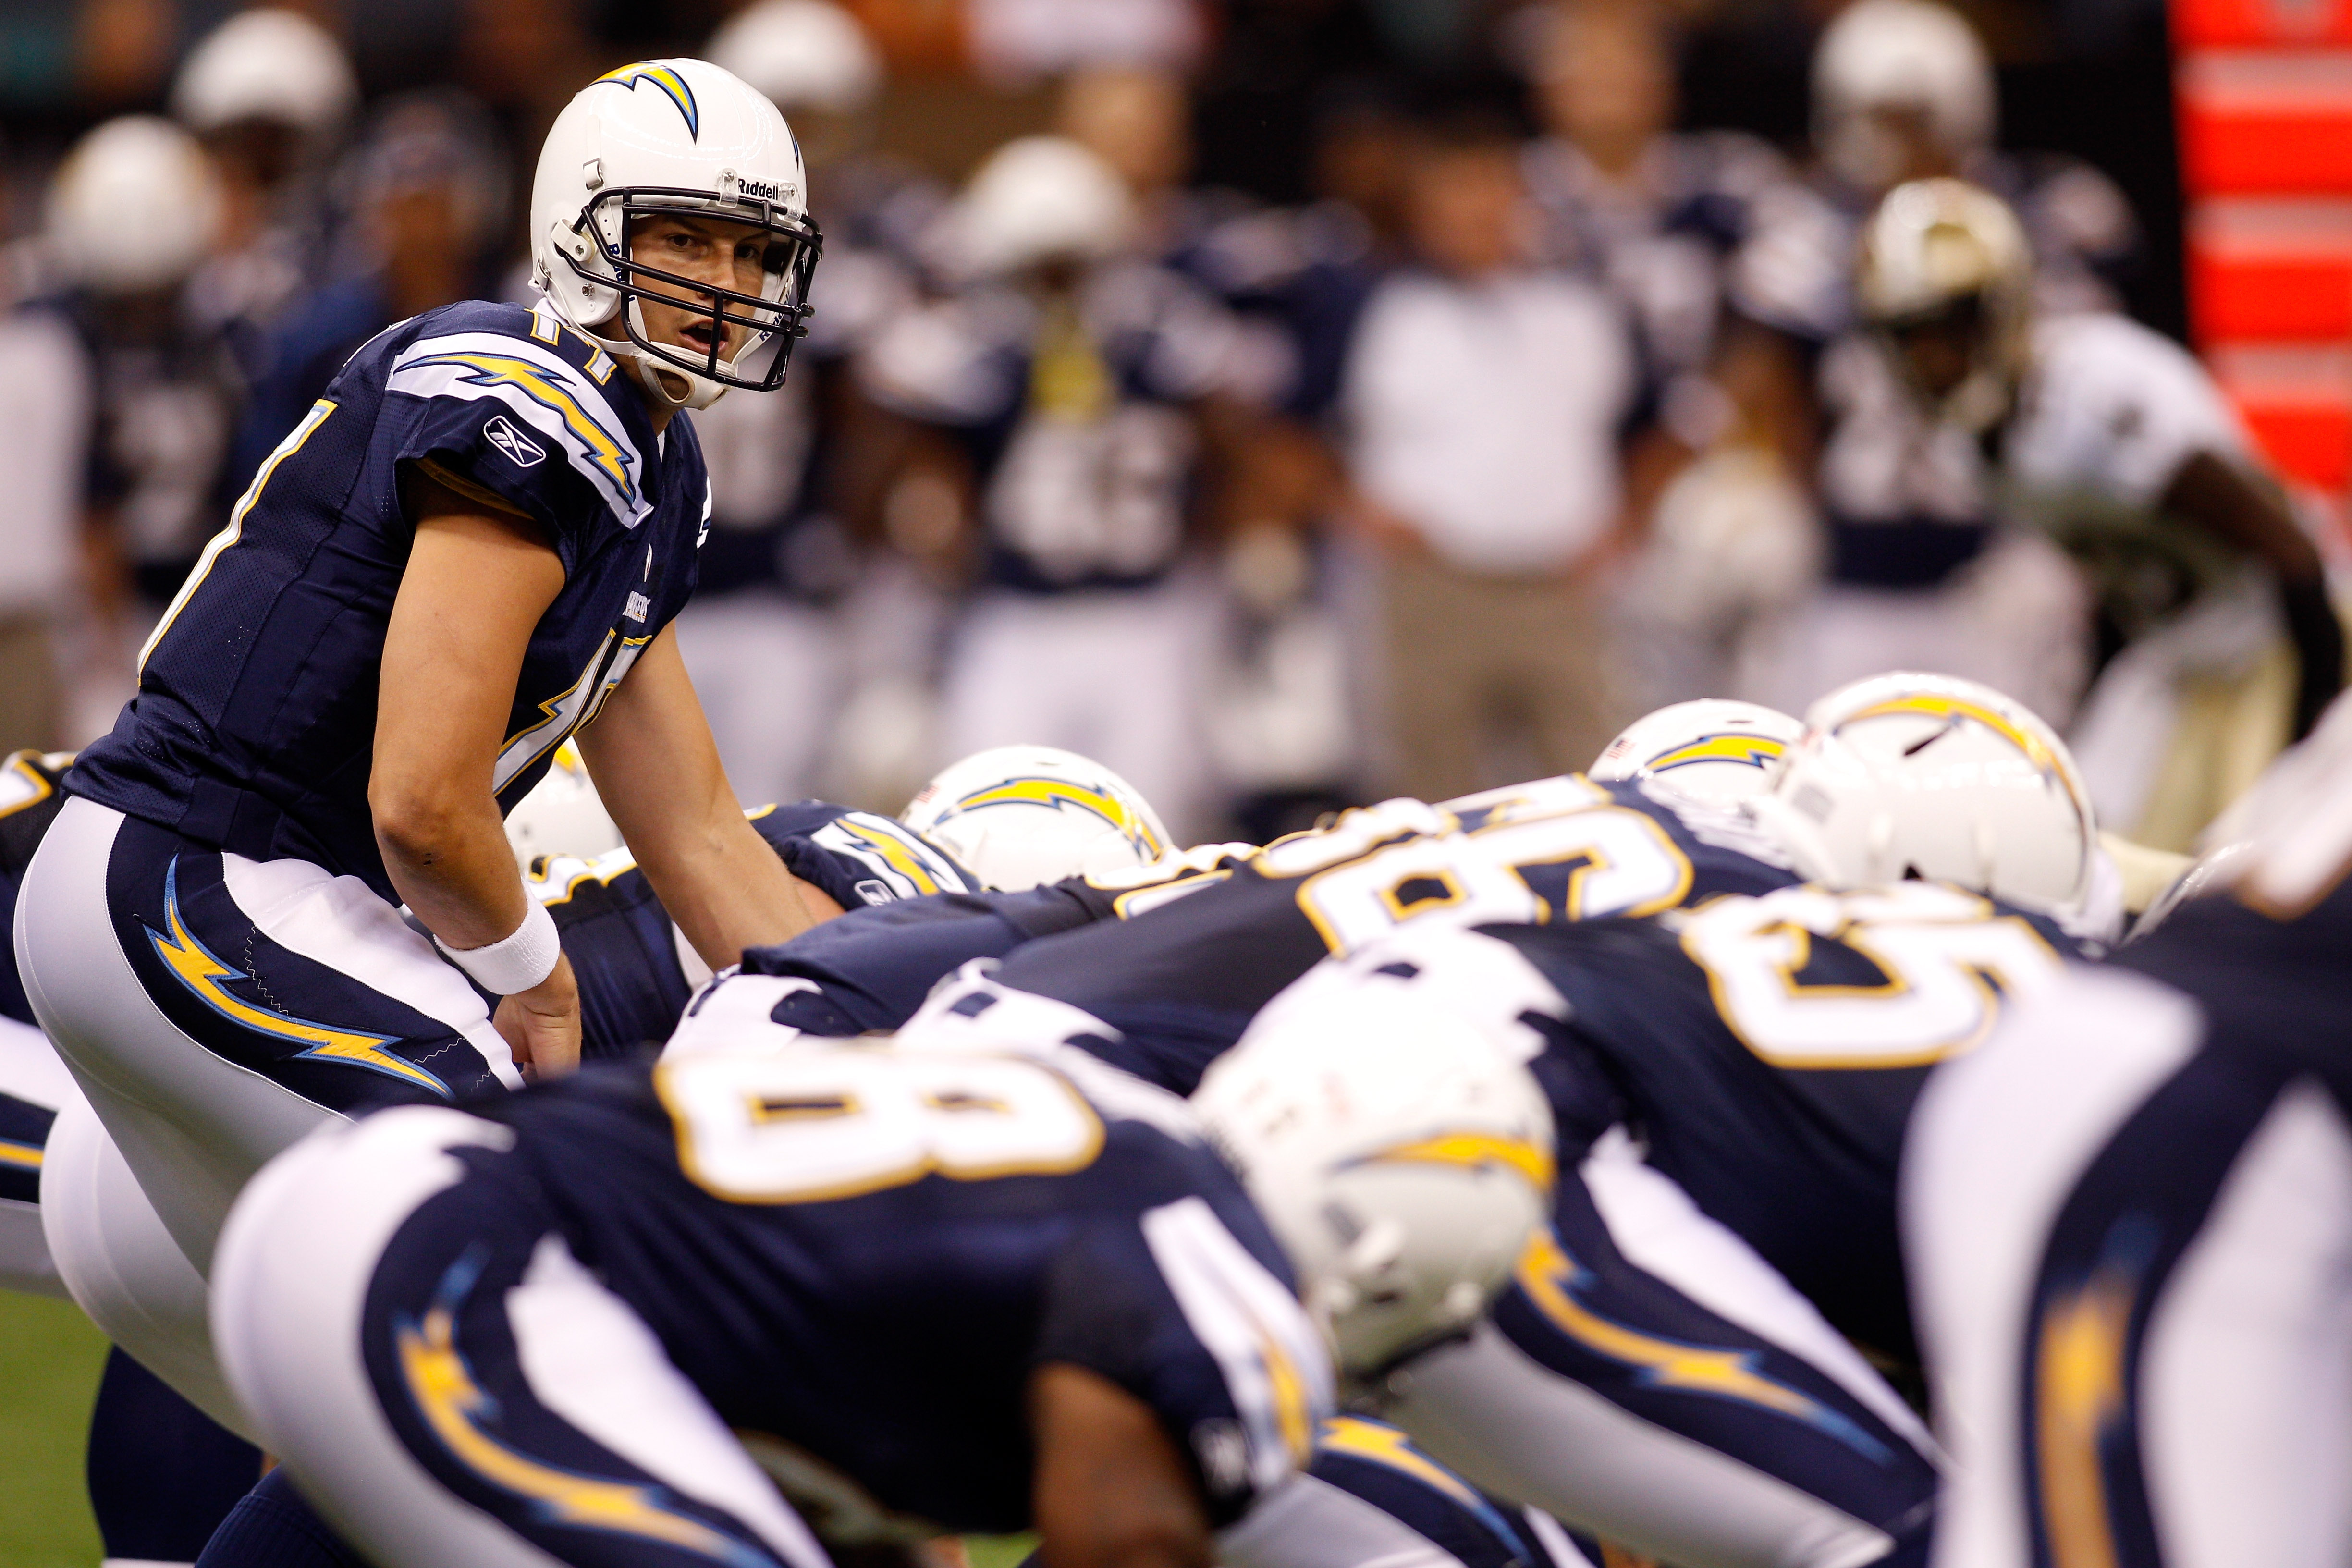 NEW ORLEANS - AUGUST 27:  Philip Rivers #17 of the San Diego Chargers in action against the New Orleans Saints at the Louisiana Superdome on August 27, 2010 in New Orleans, Louisiana.  (Photo by Chris Graythen/Getty Images)